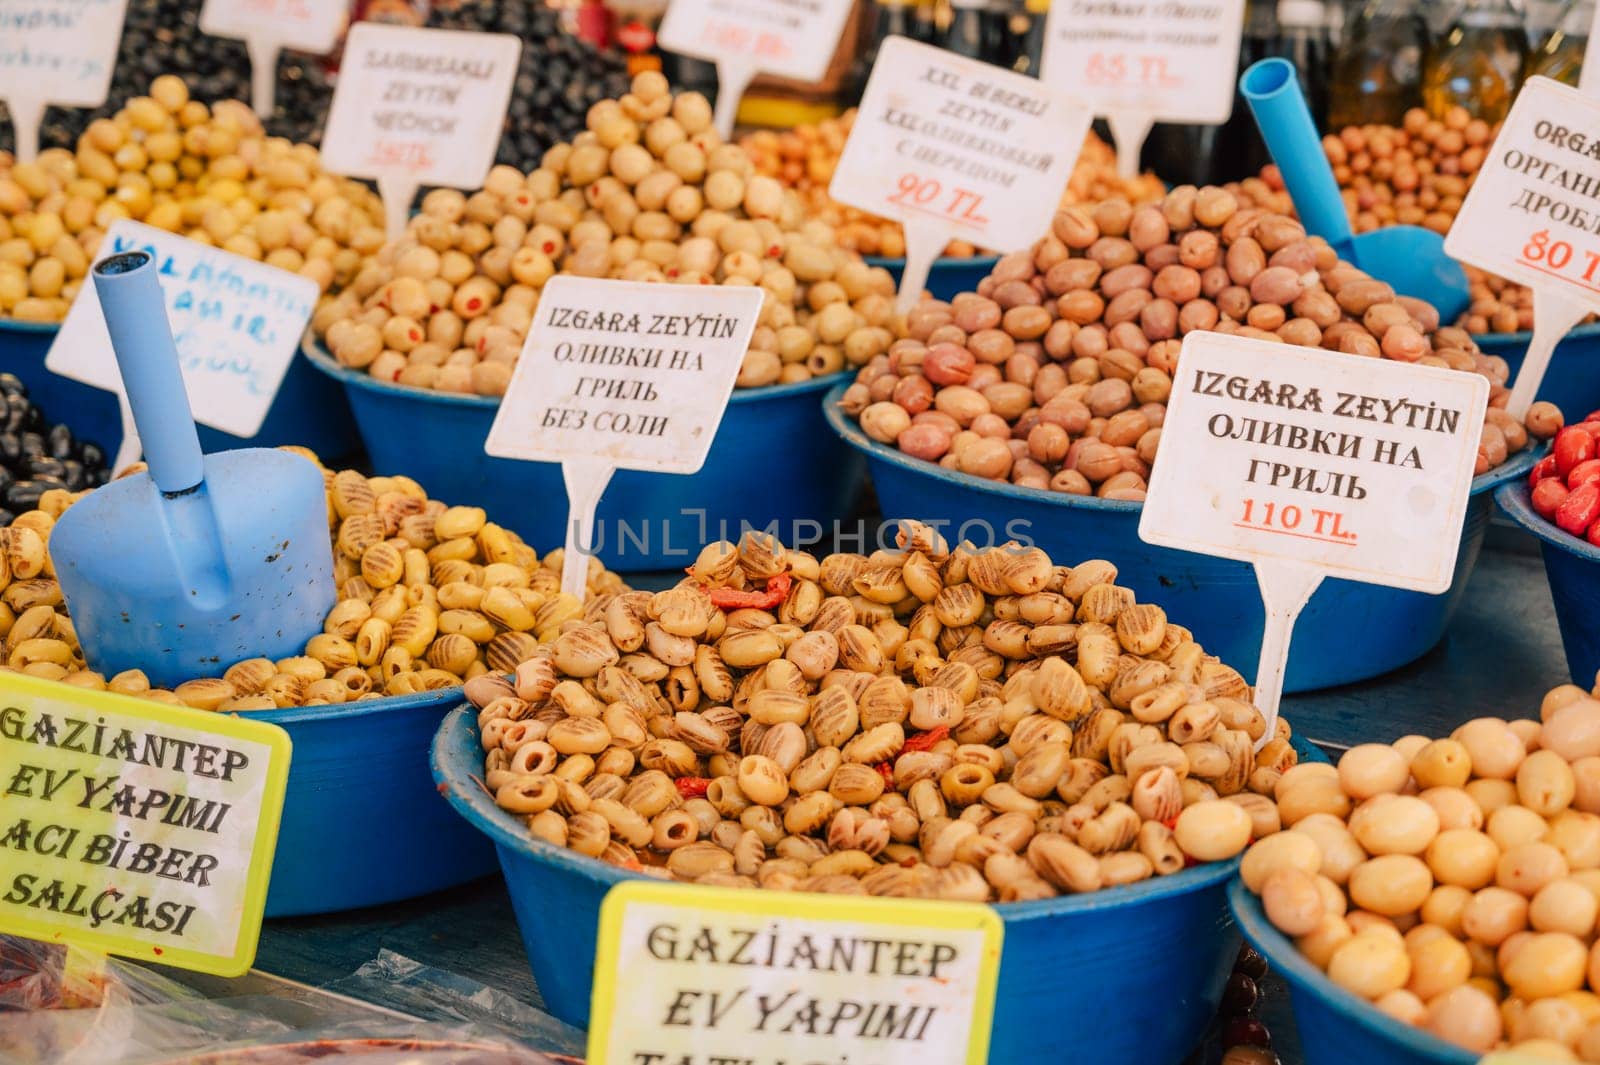 Different olives trading in the Turkish market by rusak